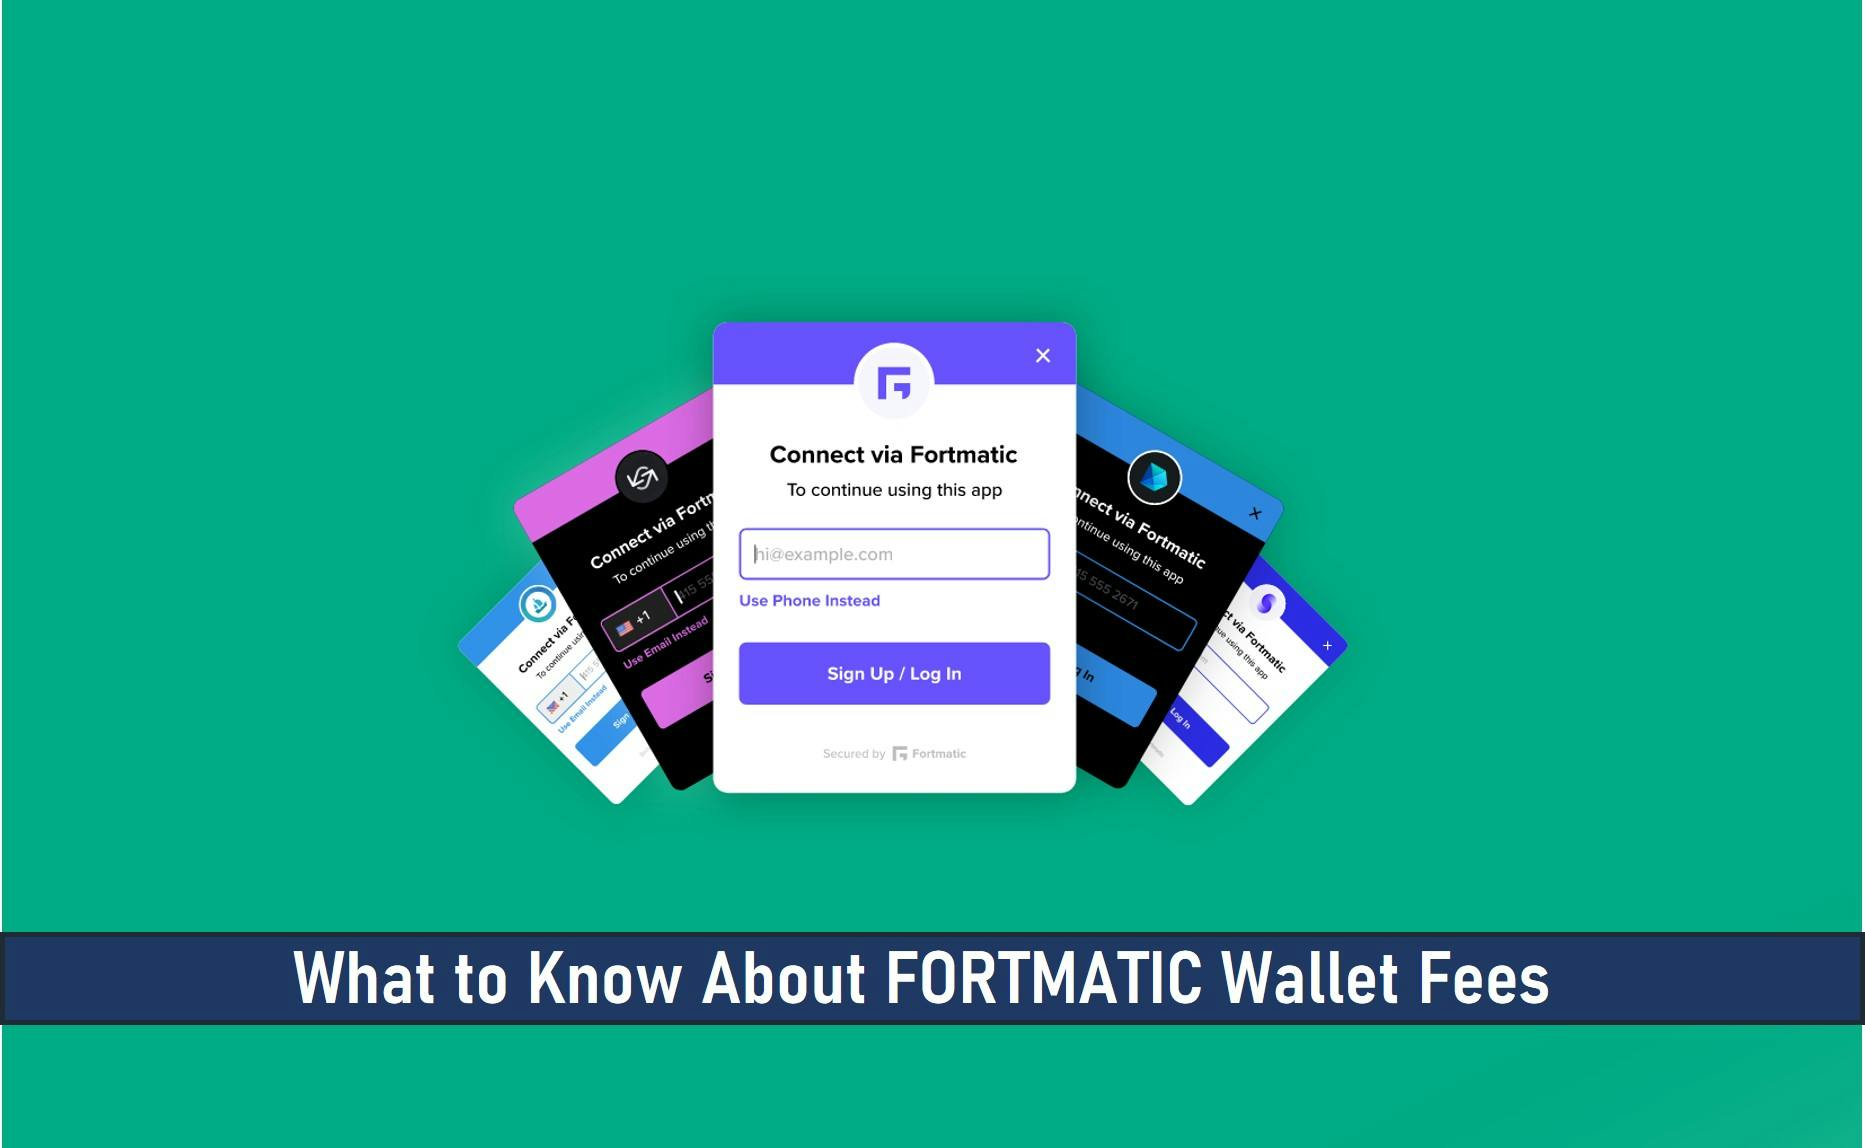 What to Know About Formatic Wallet Fees